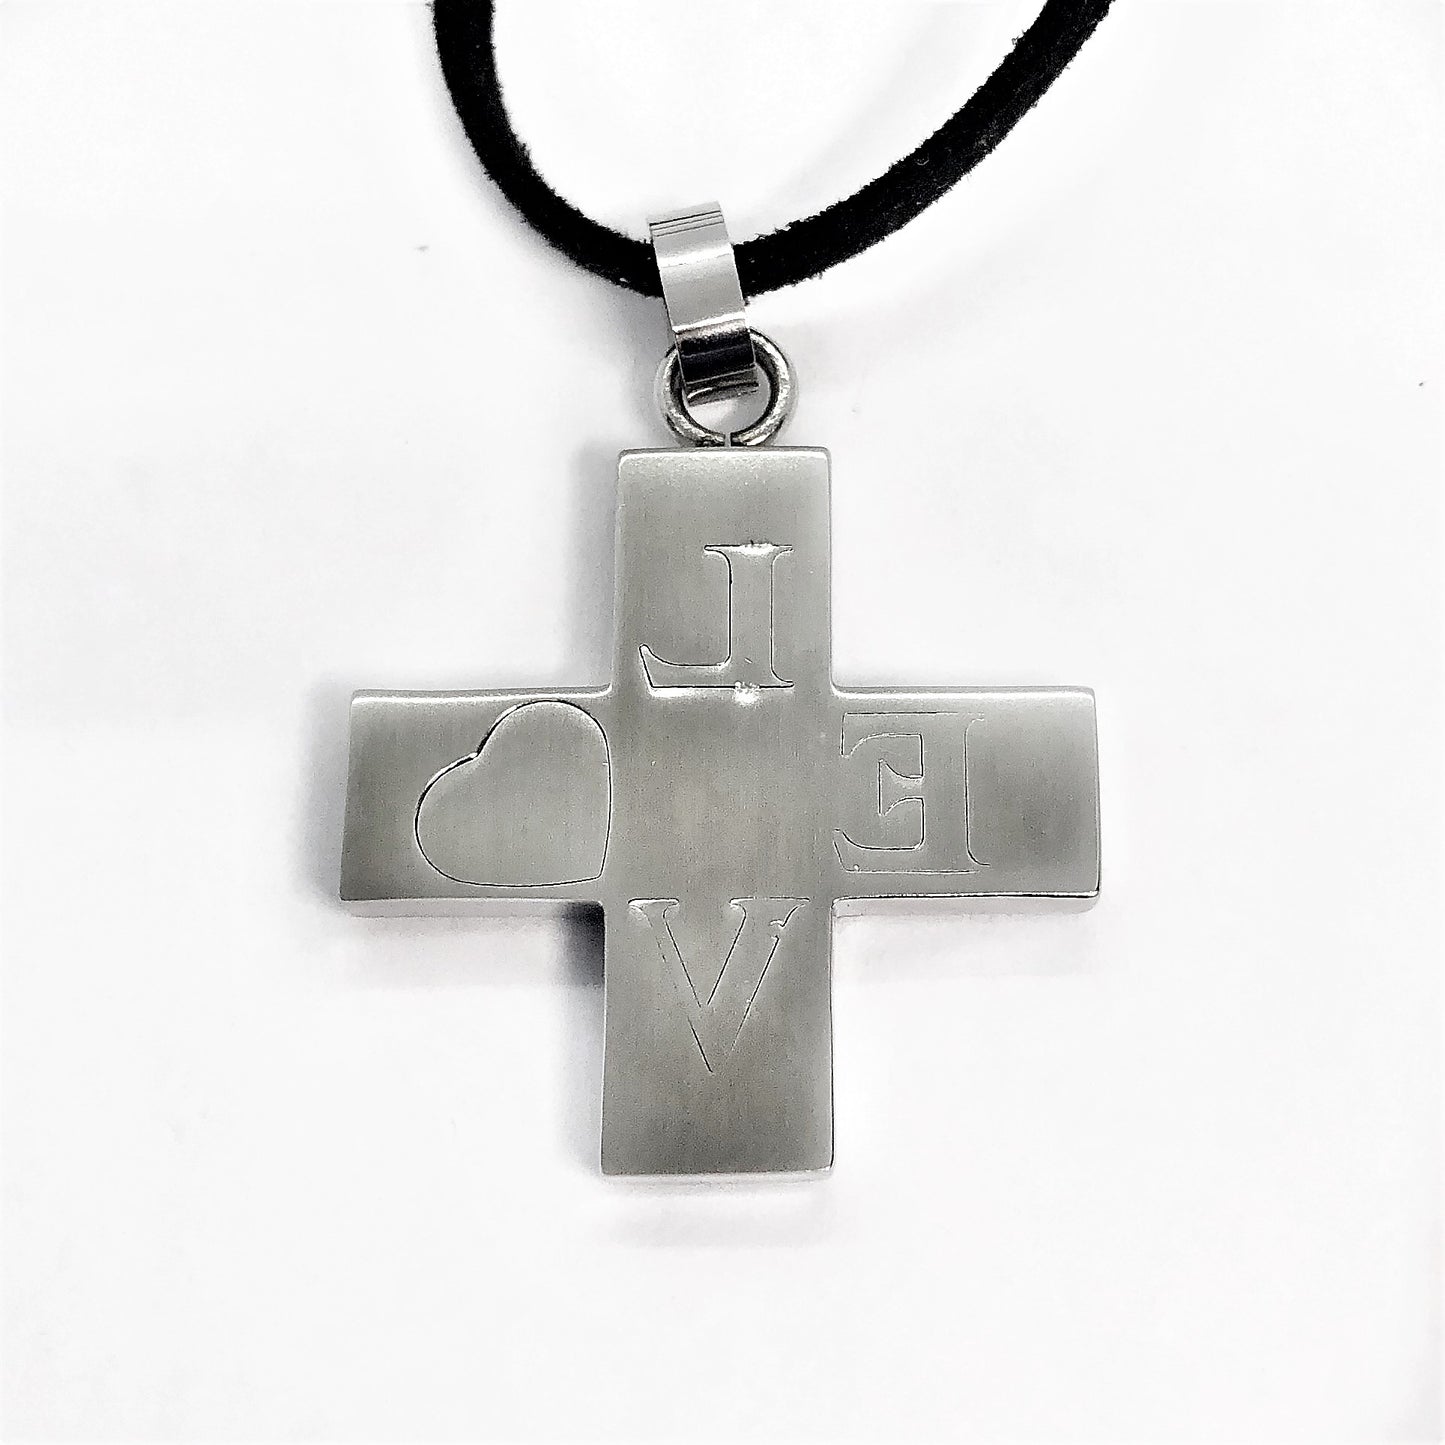 LOVE Stainless Steel Cross Necklace